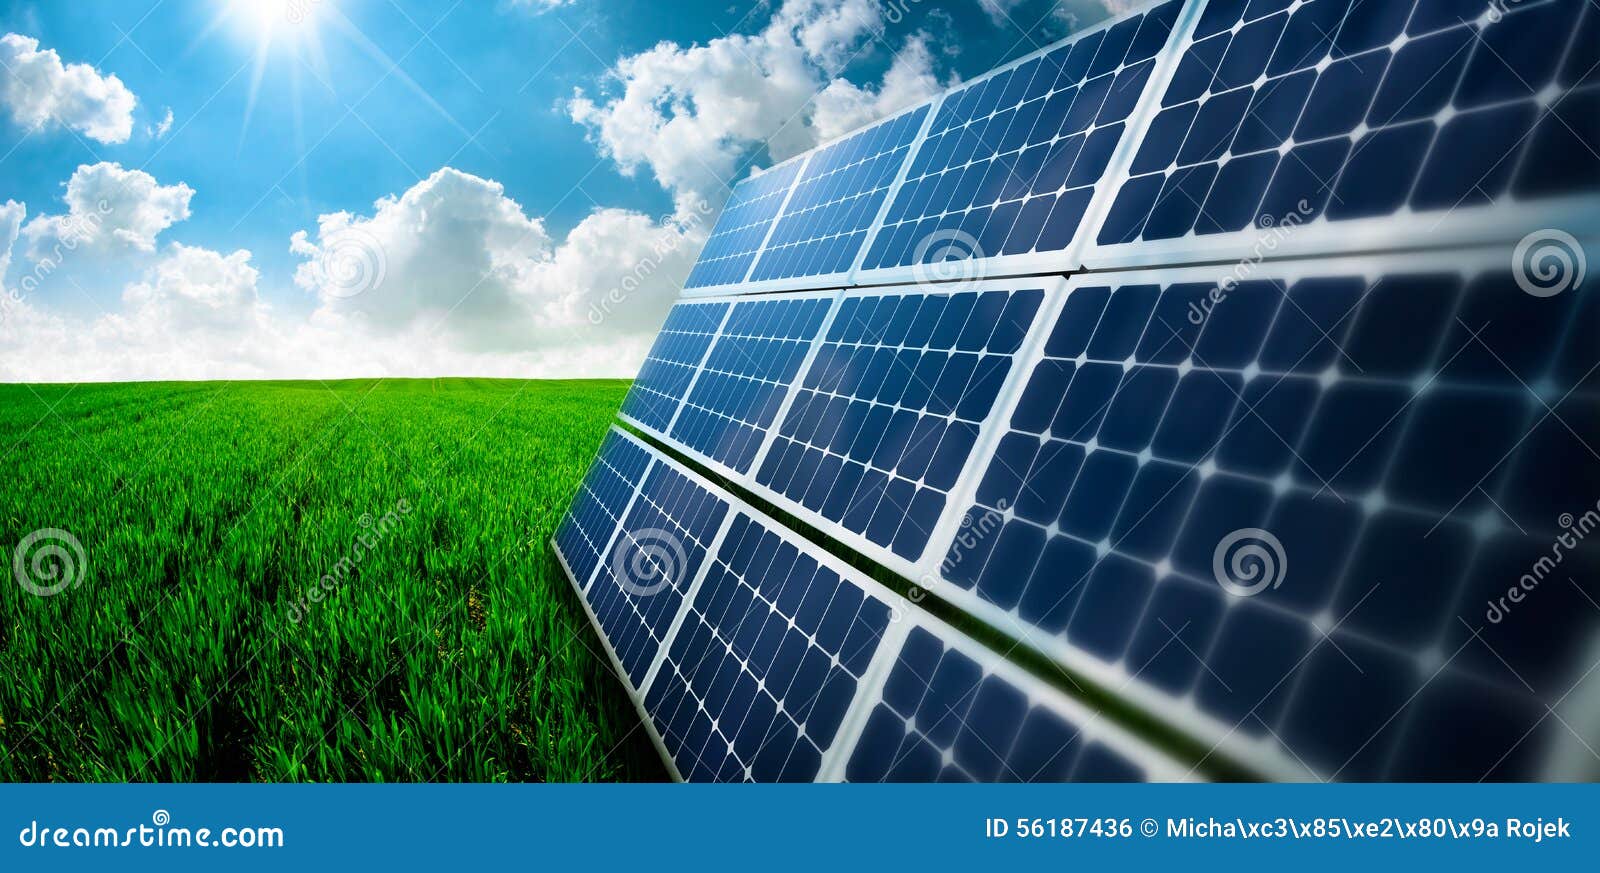 photovoltaic ecological modules in grass